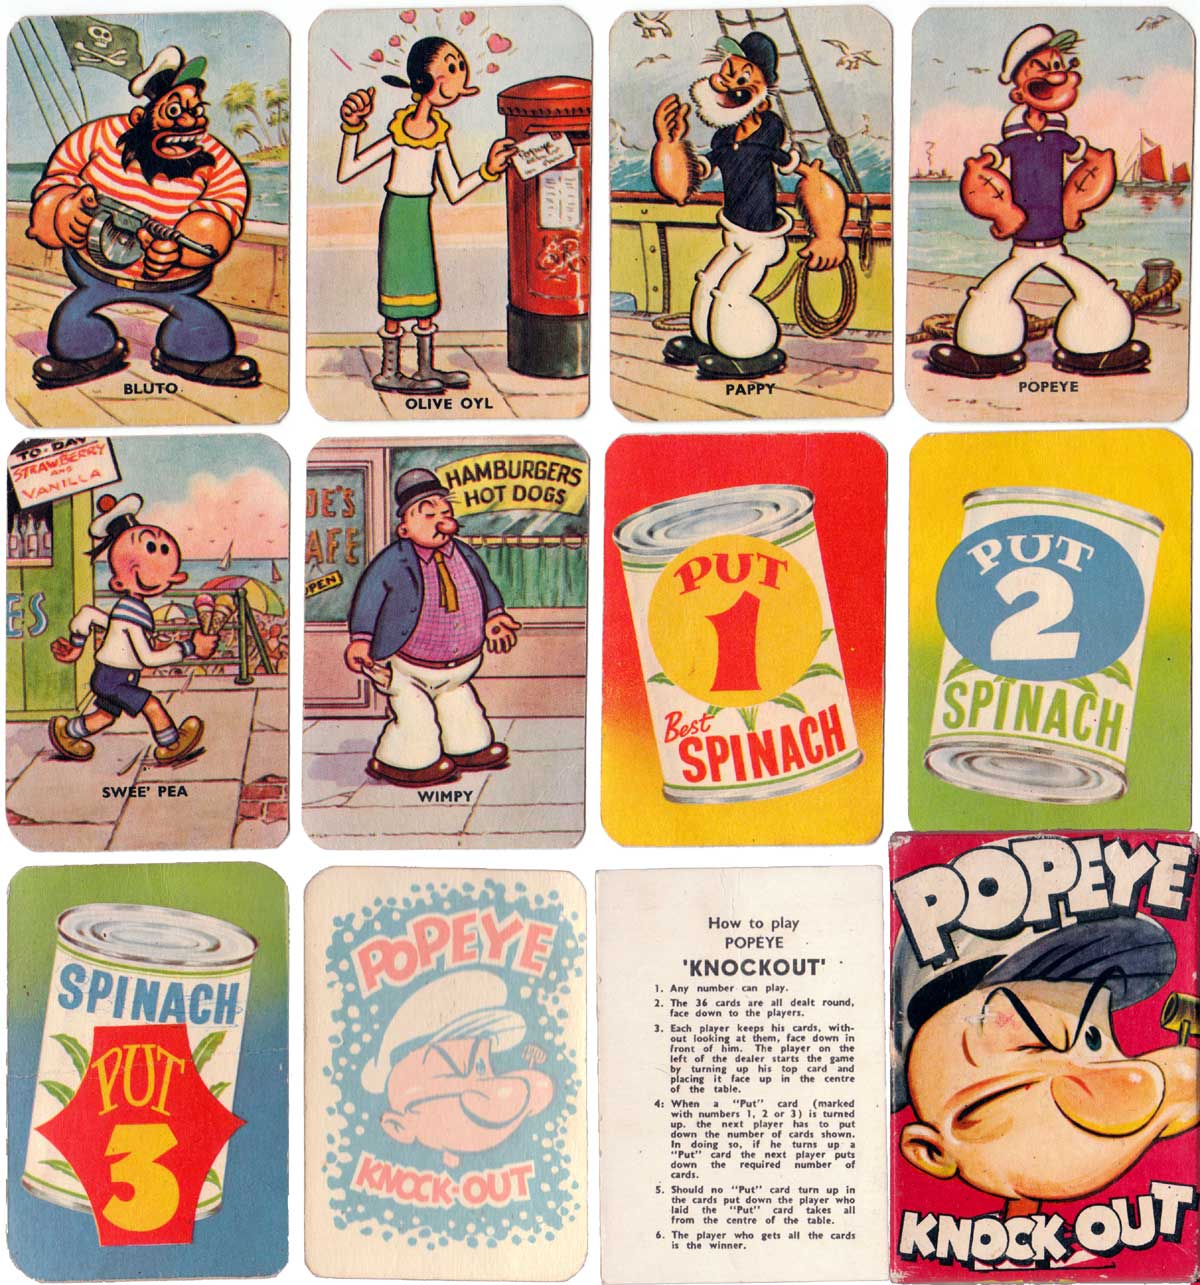 Popeye Knockout No.6586 by Tower Press, c.1961